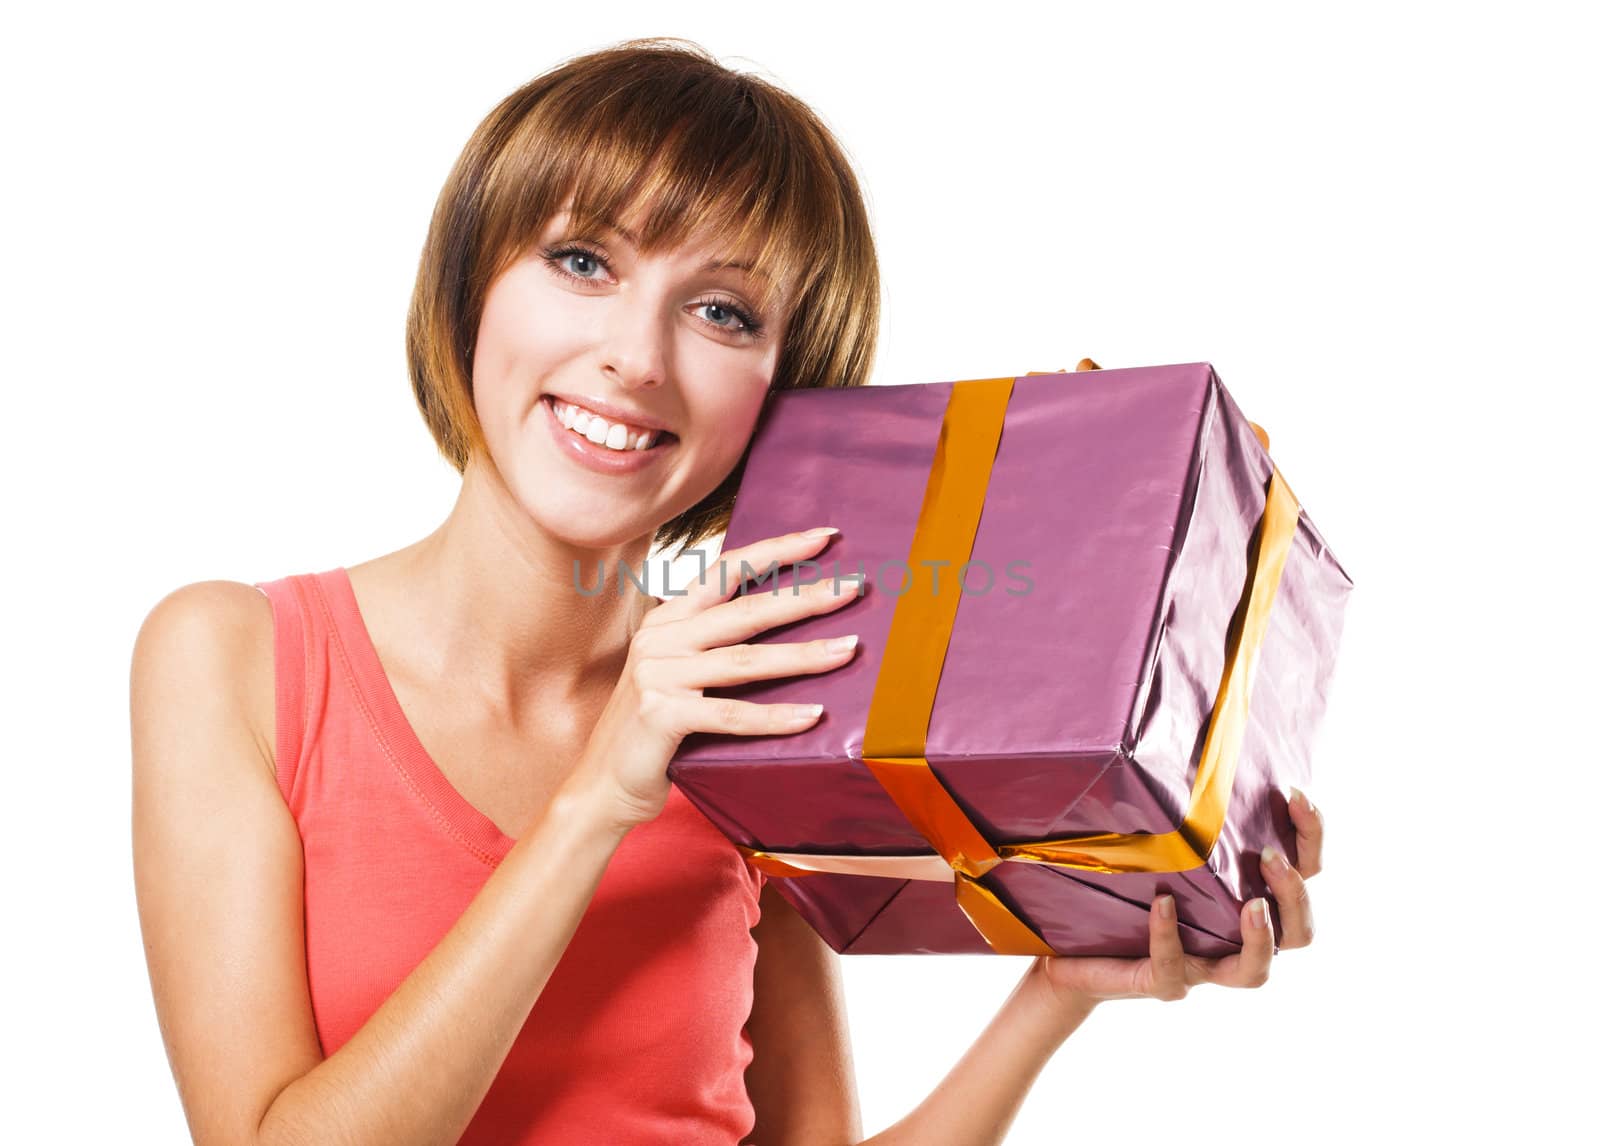 Lovely girl with a gift box, white background